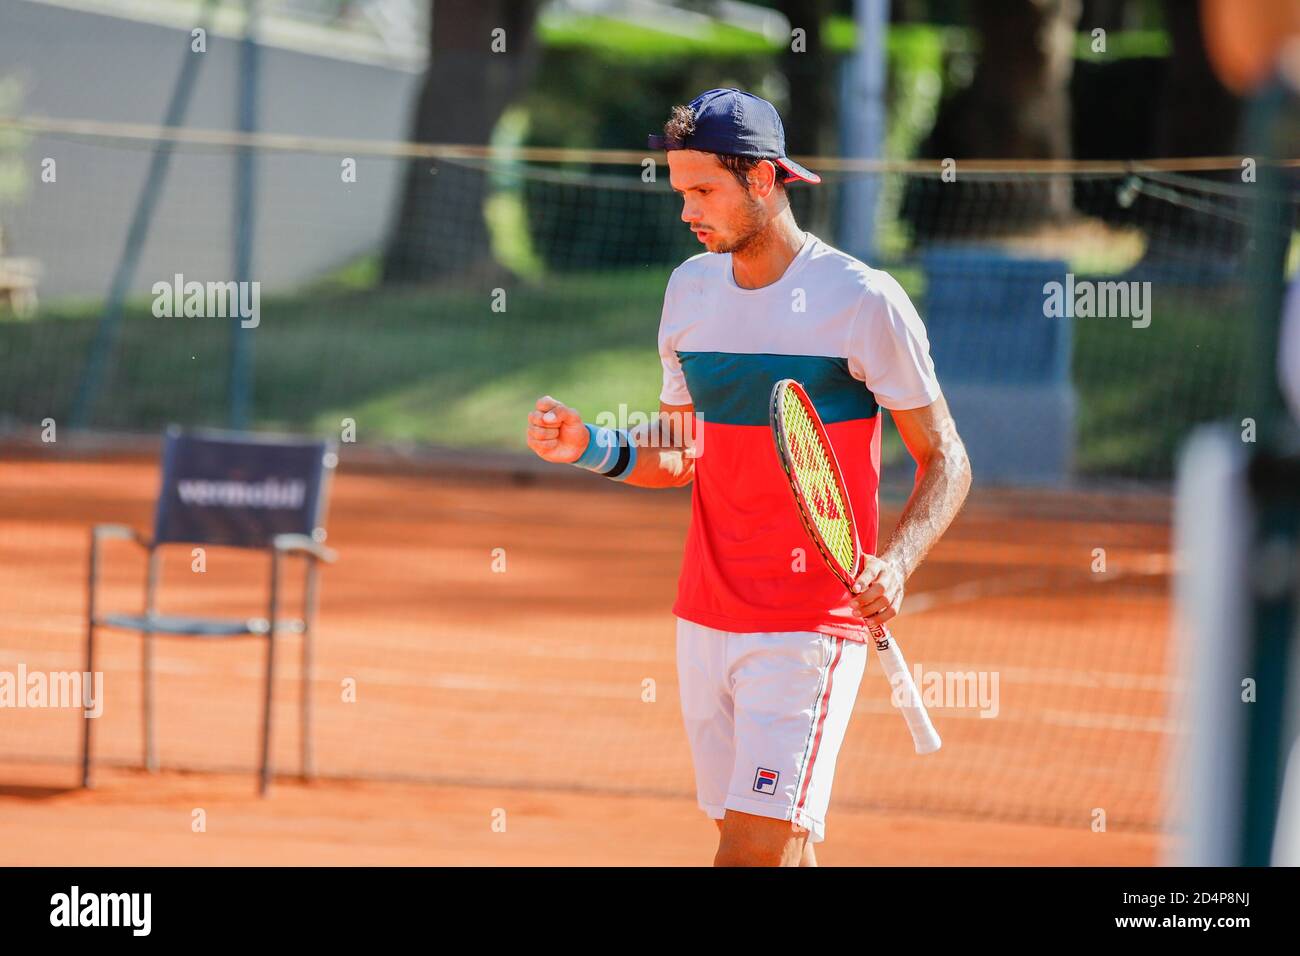 Parma, Italy. 9th Oct, 2020. parma, Italy, 09 Oct 2020, Juan Pablo Ficovich during ATP Challenger 125 - Internazionali Emilia Romagna - Tennis Internationals - Credit: LM/Roberta Corradin Credit: Roberta Corradin/LPS/ZUMA Wire/Alamy Live News Stock Photo